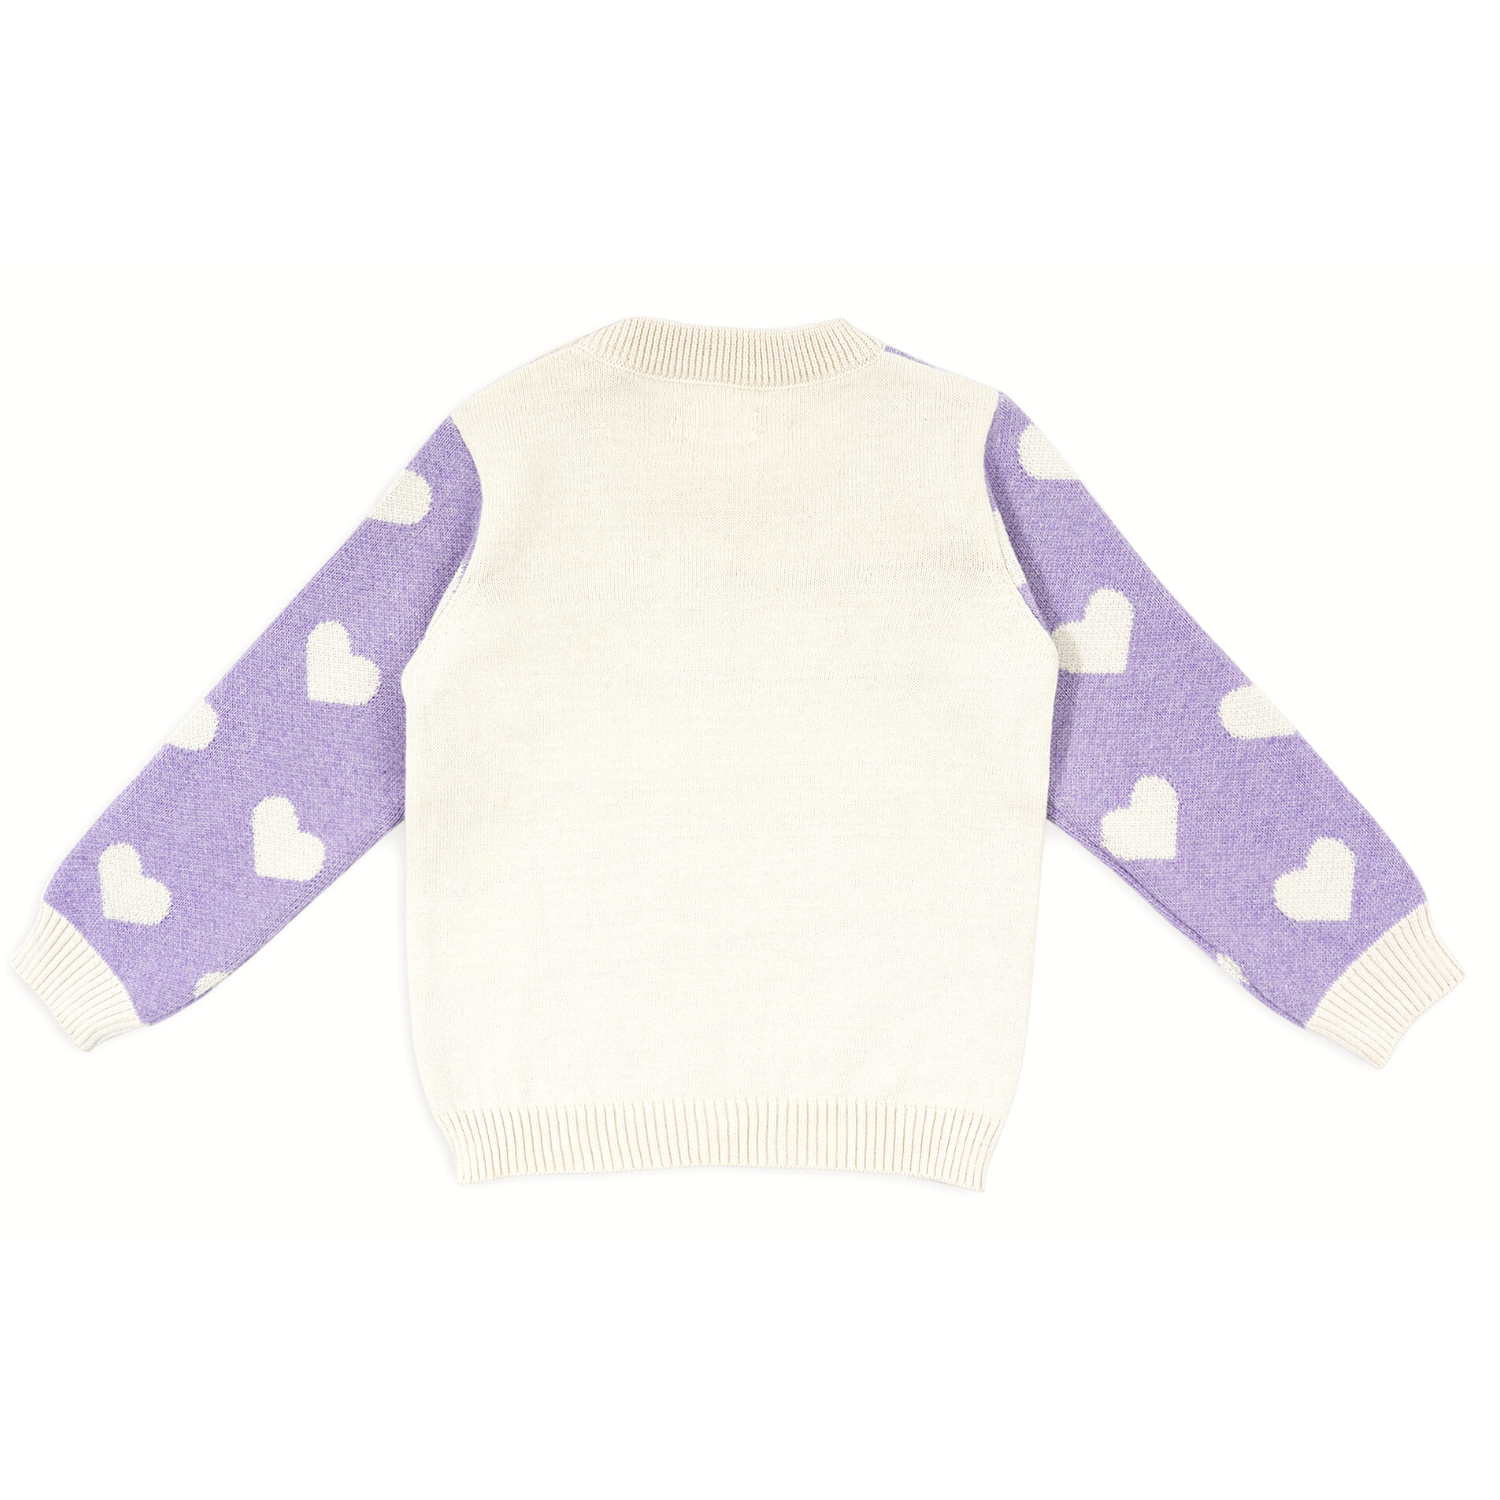 Blue and Lavender Ballon Love Sweater Combo Set of 2